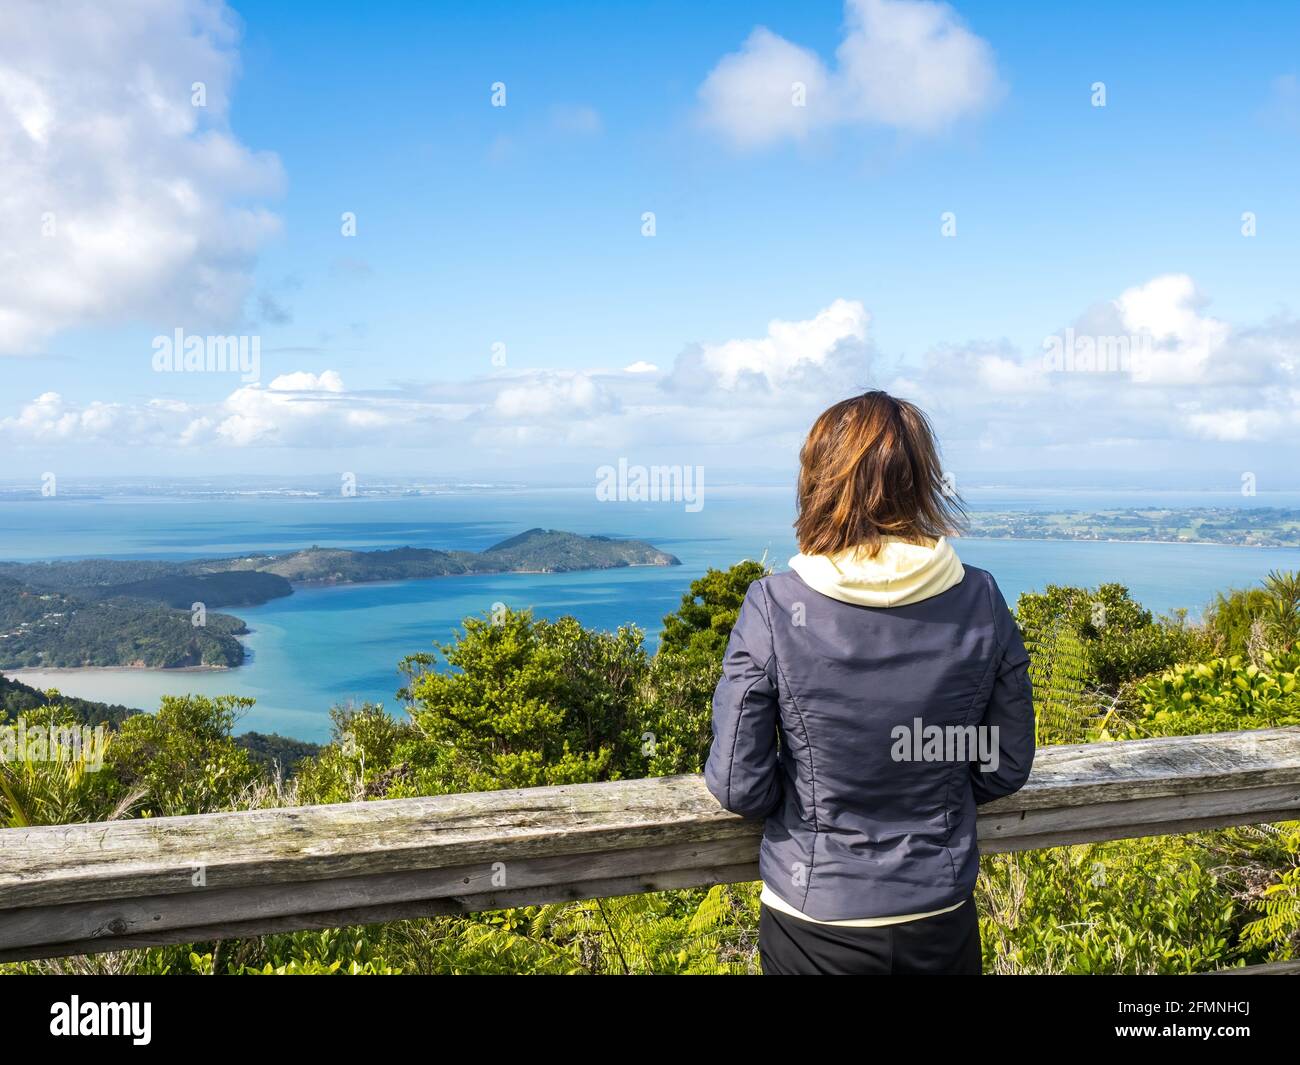 AUCKLAND, NEW ZEALAND - Apr 27, 2021: Woman at Mt Donald McLean lookout observing Manukau Inlet Stock Photo